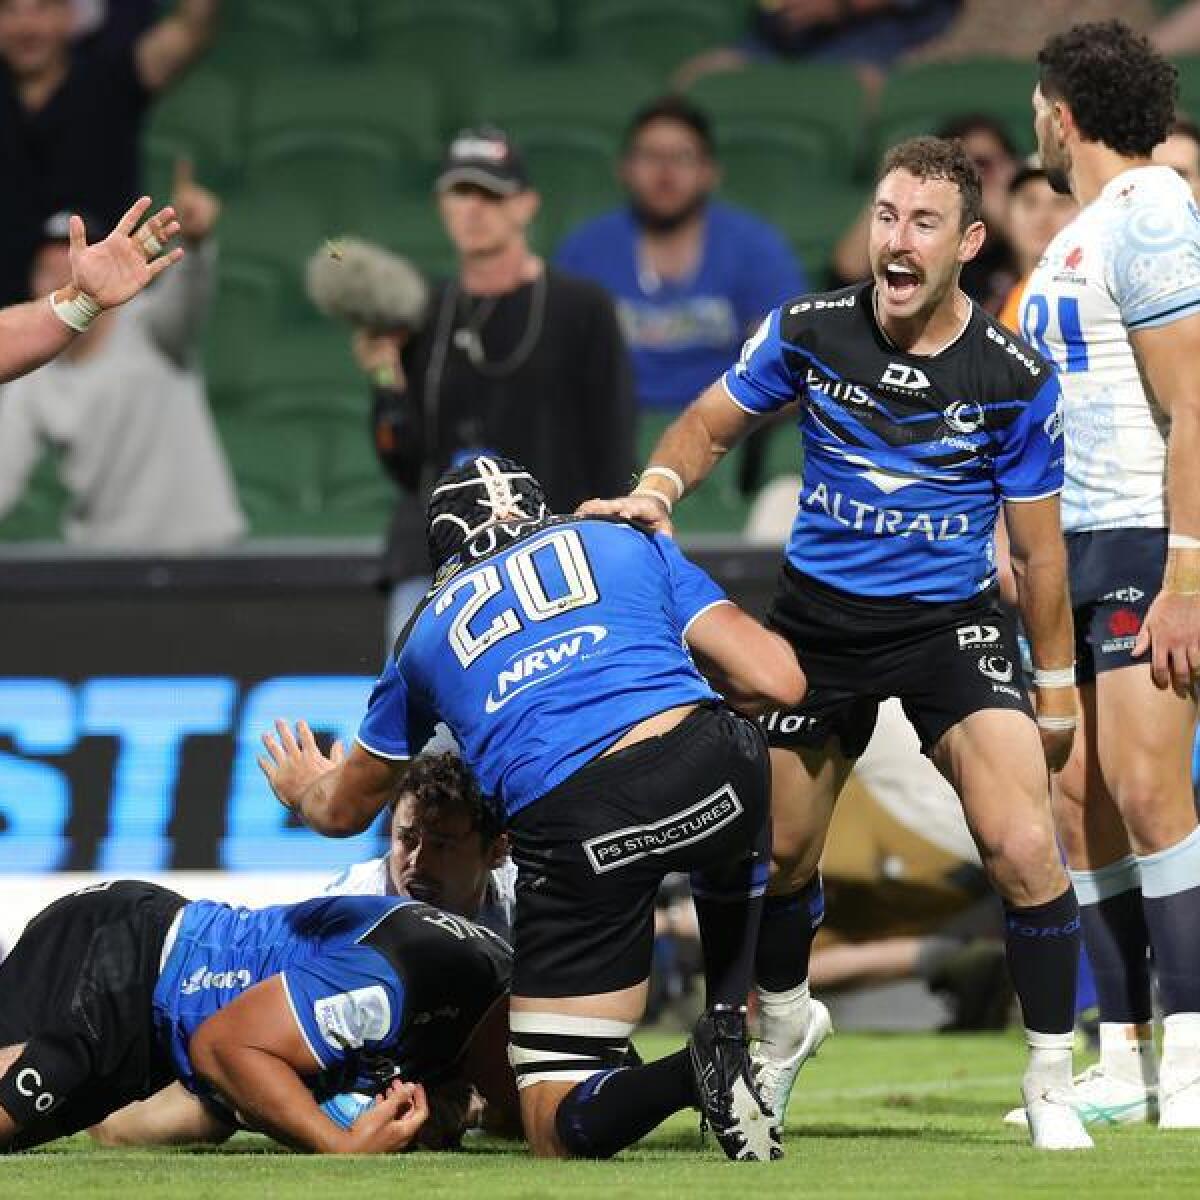 Reed Prinsep scores a try for the Western Force.